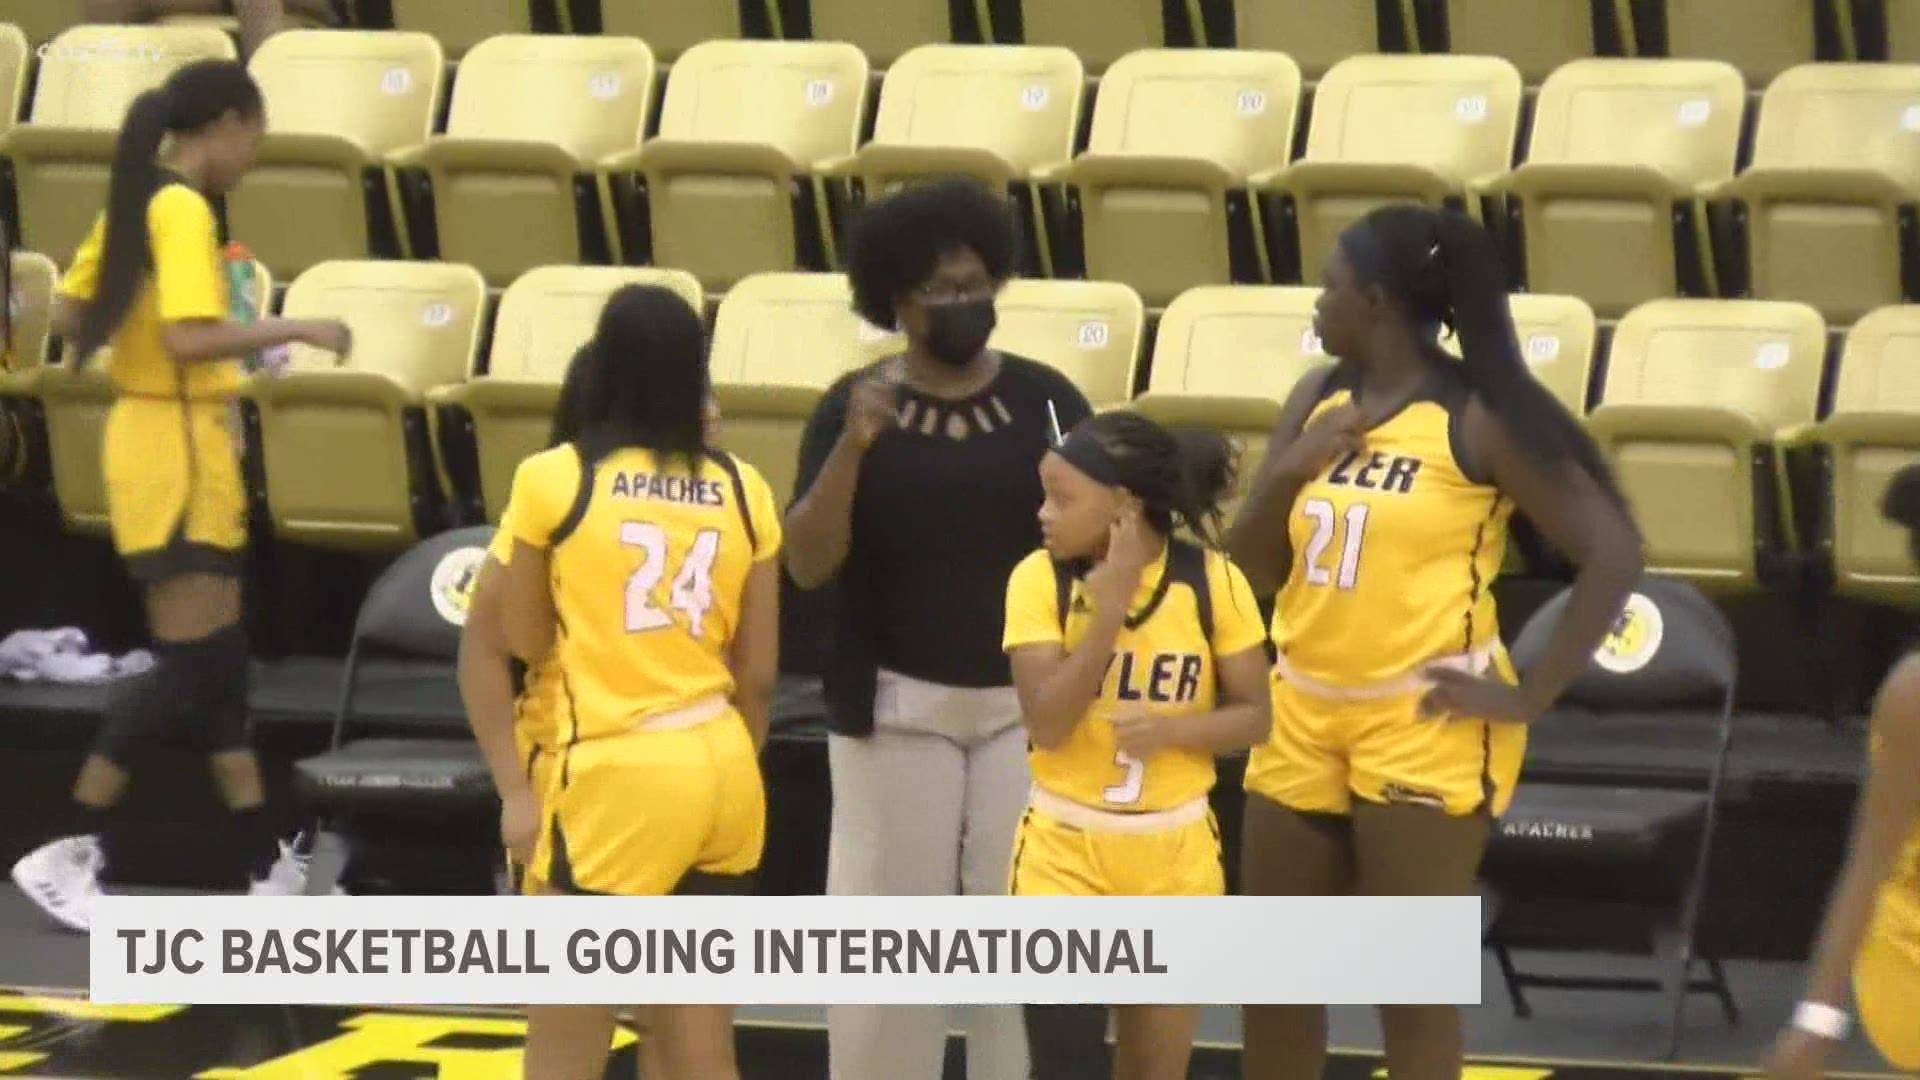 For 4 players on the TJC women's basketball team, donning the yellow and gold is the opportunity of a lifetime.